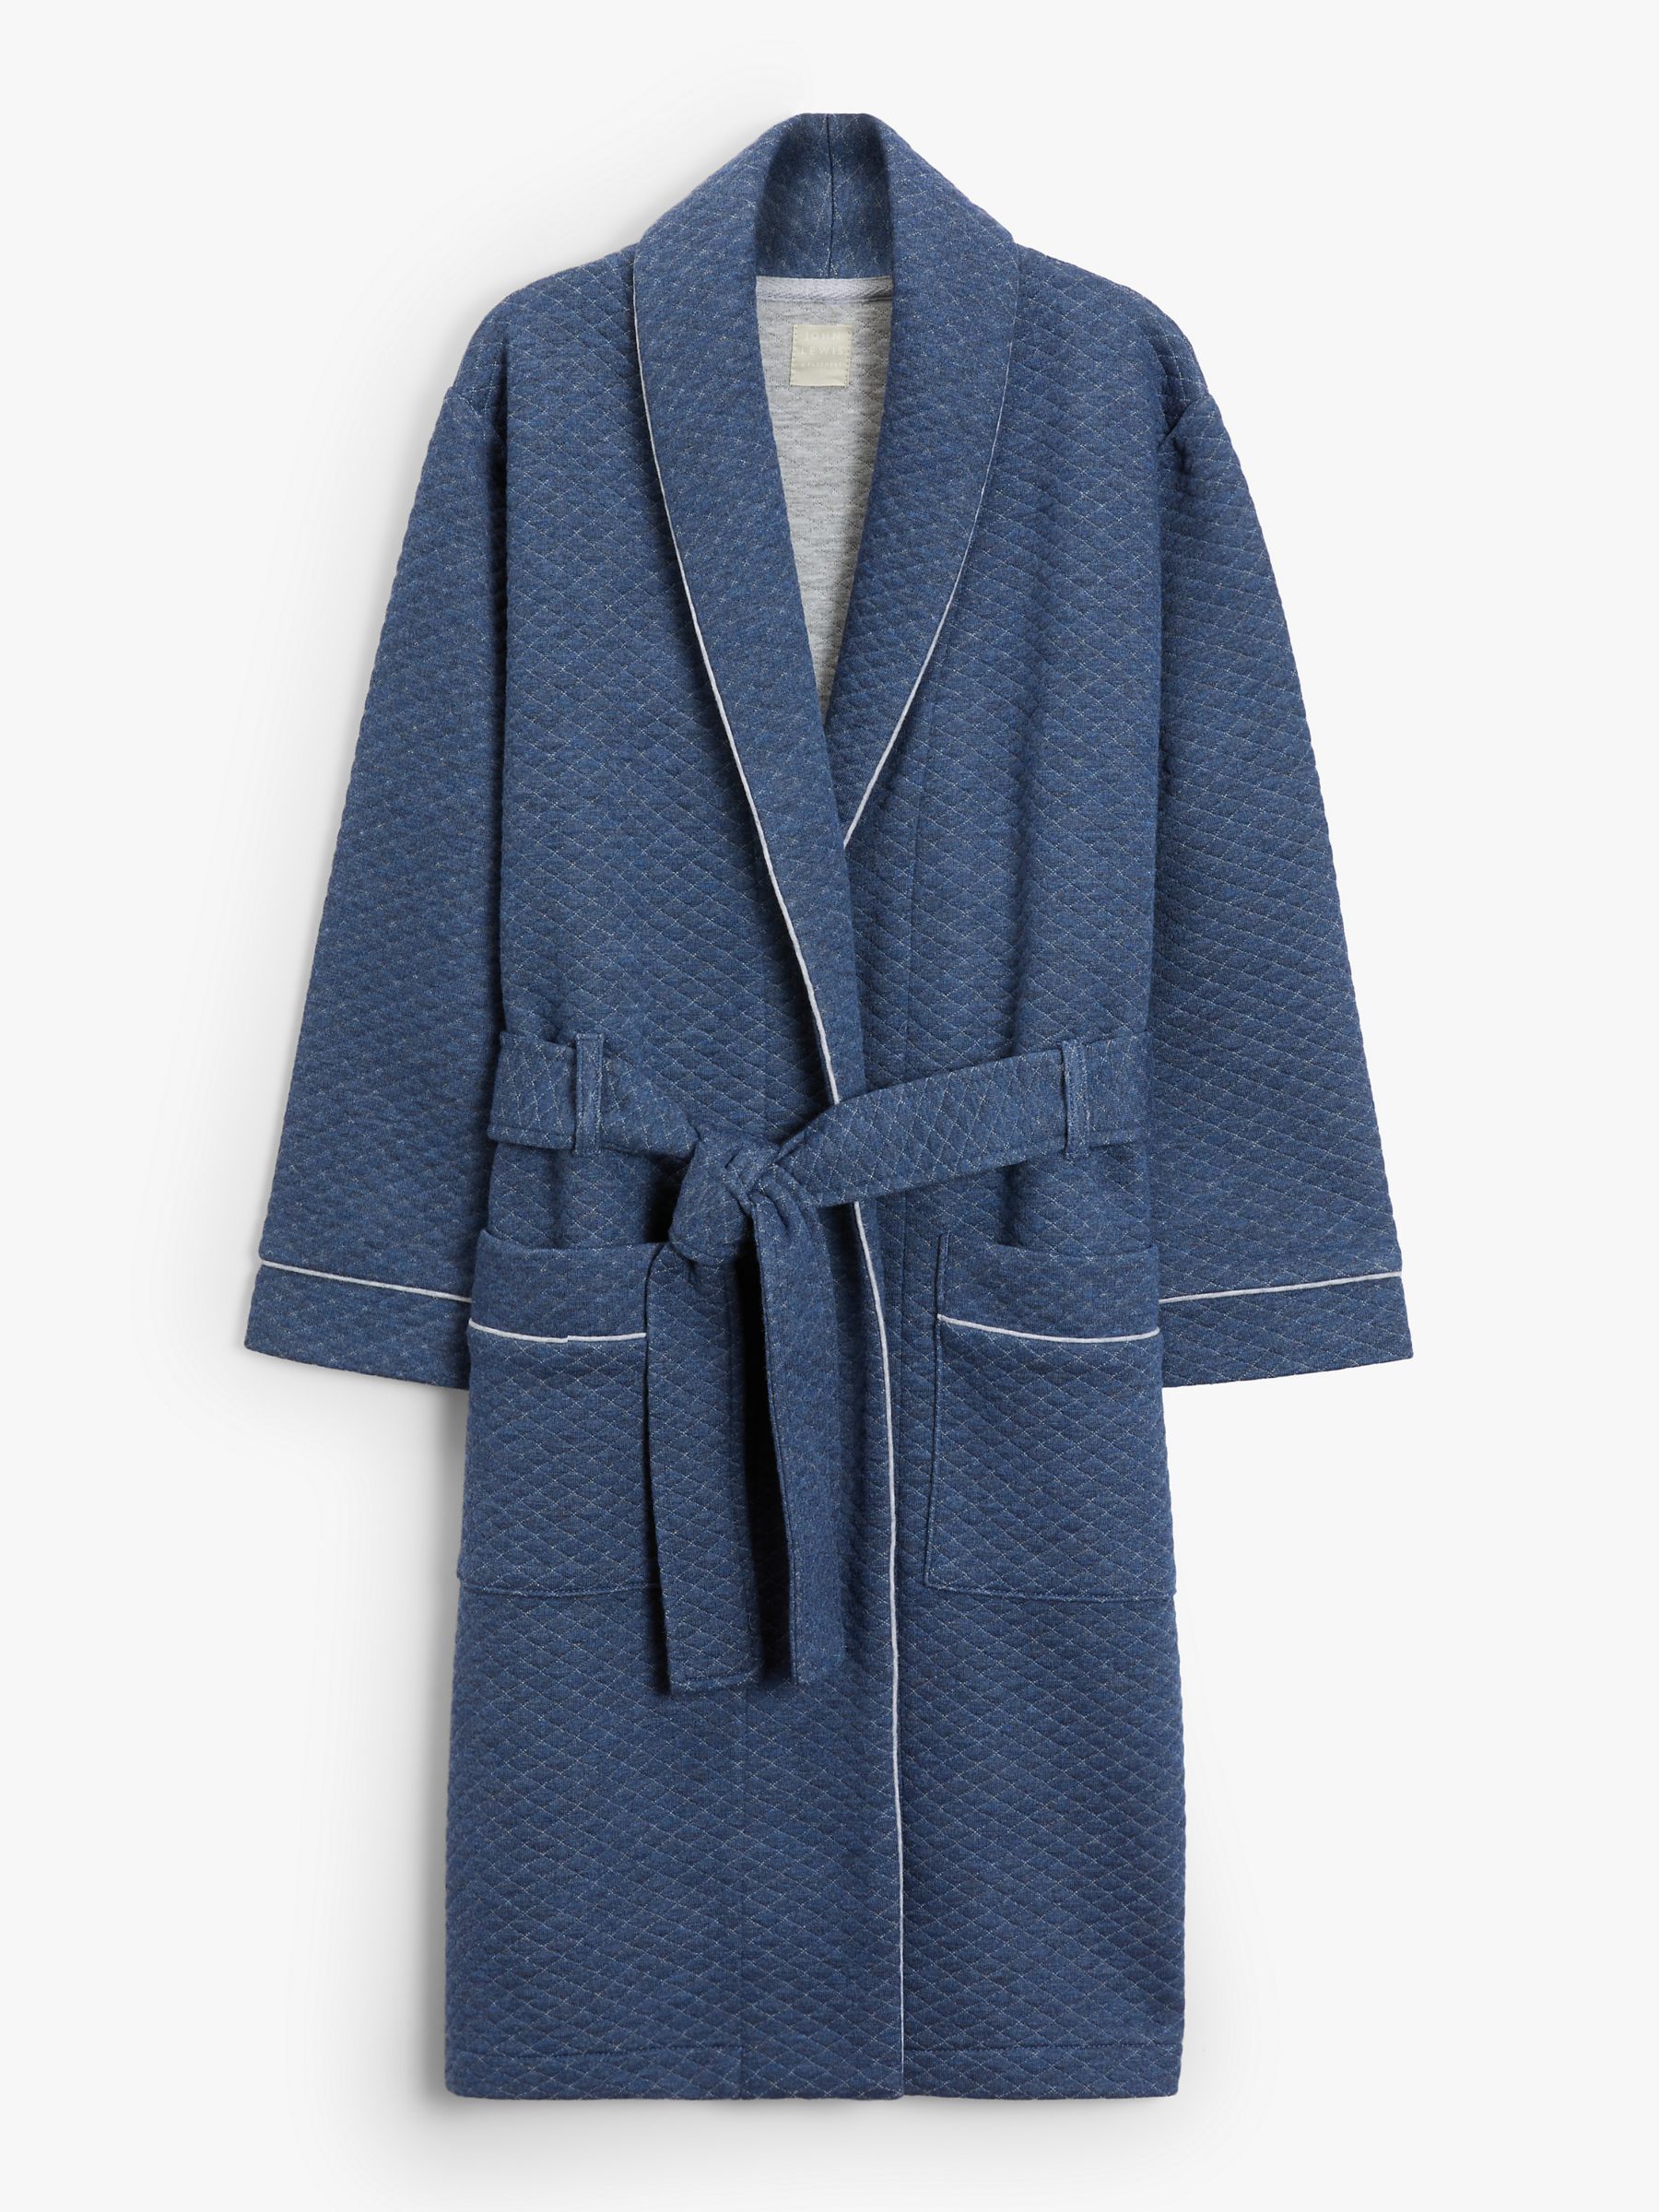 Image of John Lewis and Partners Boys Classic Robe Blue